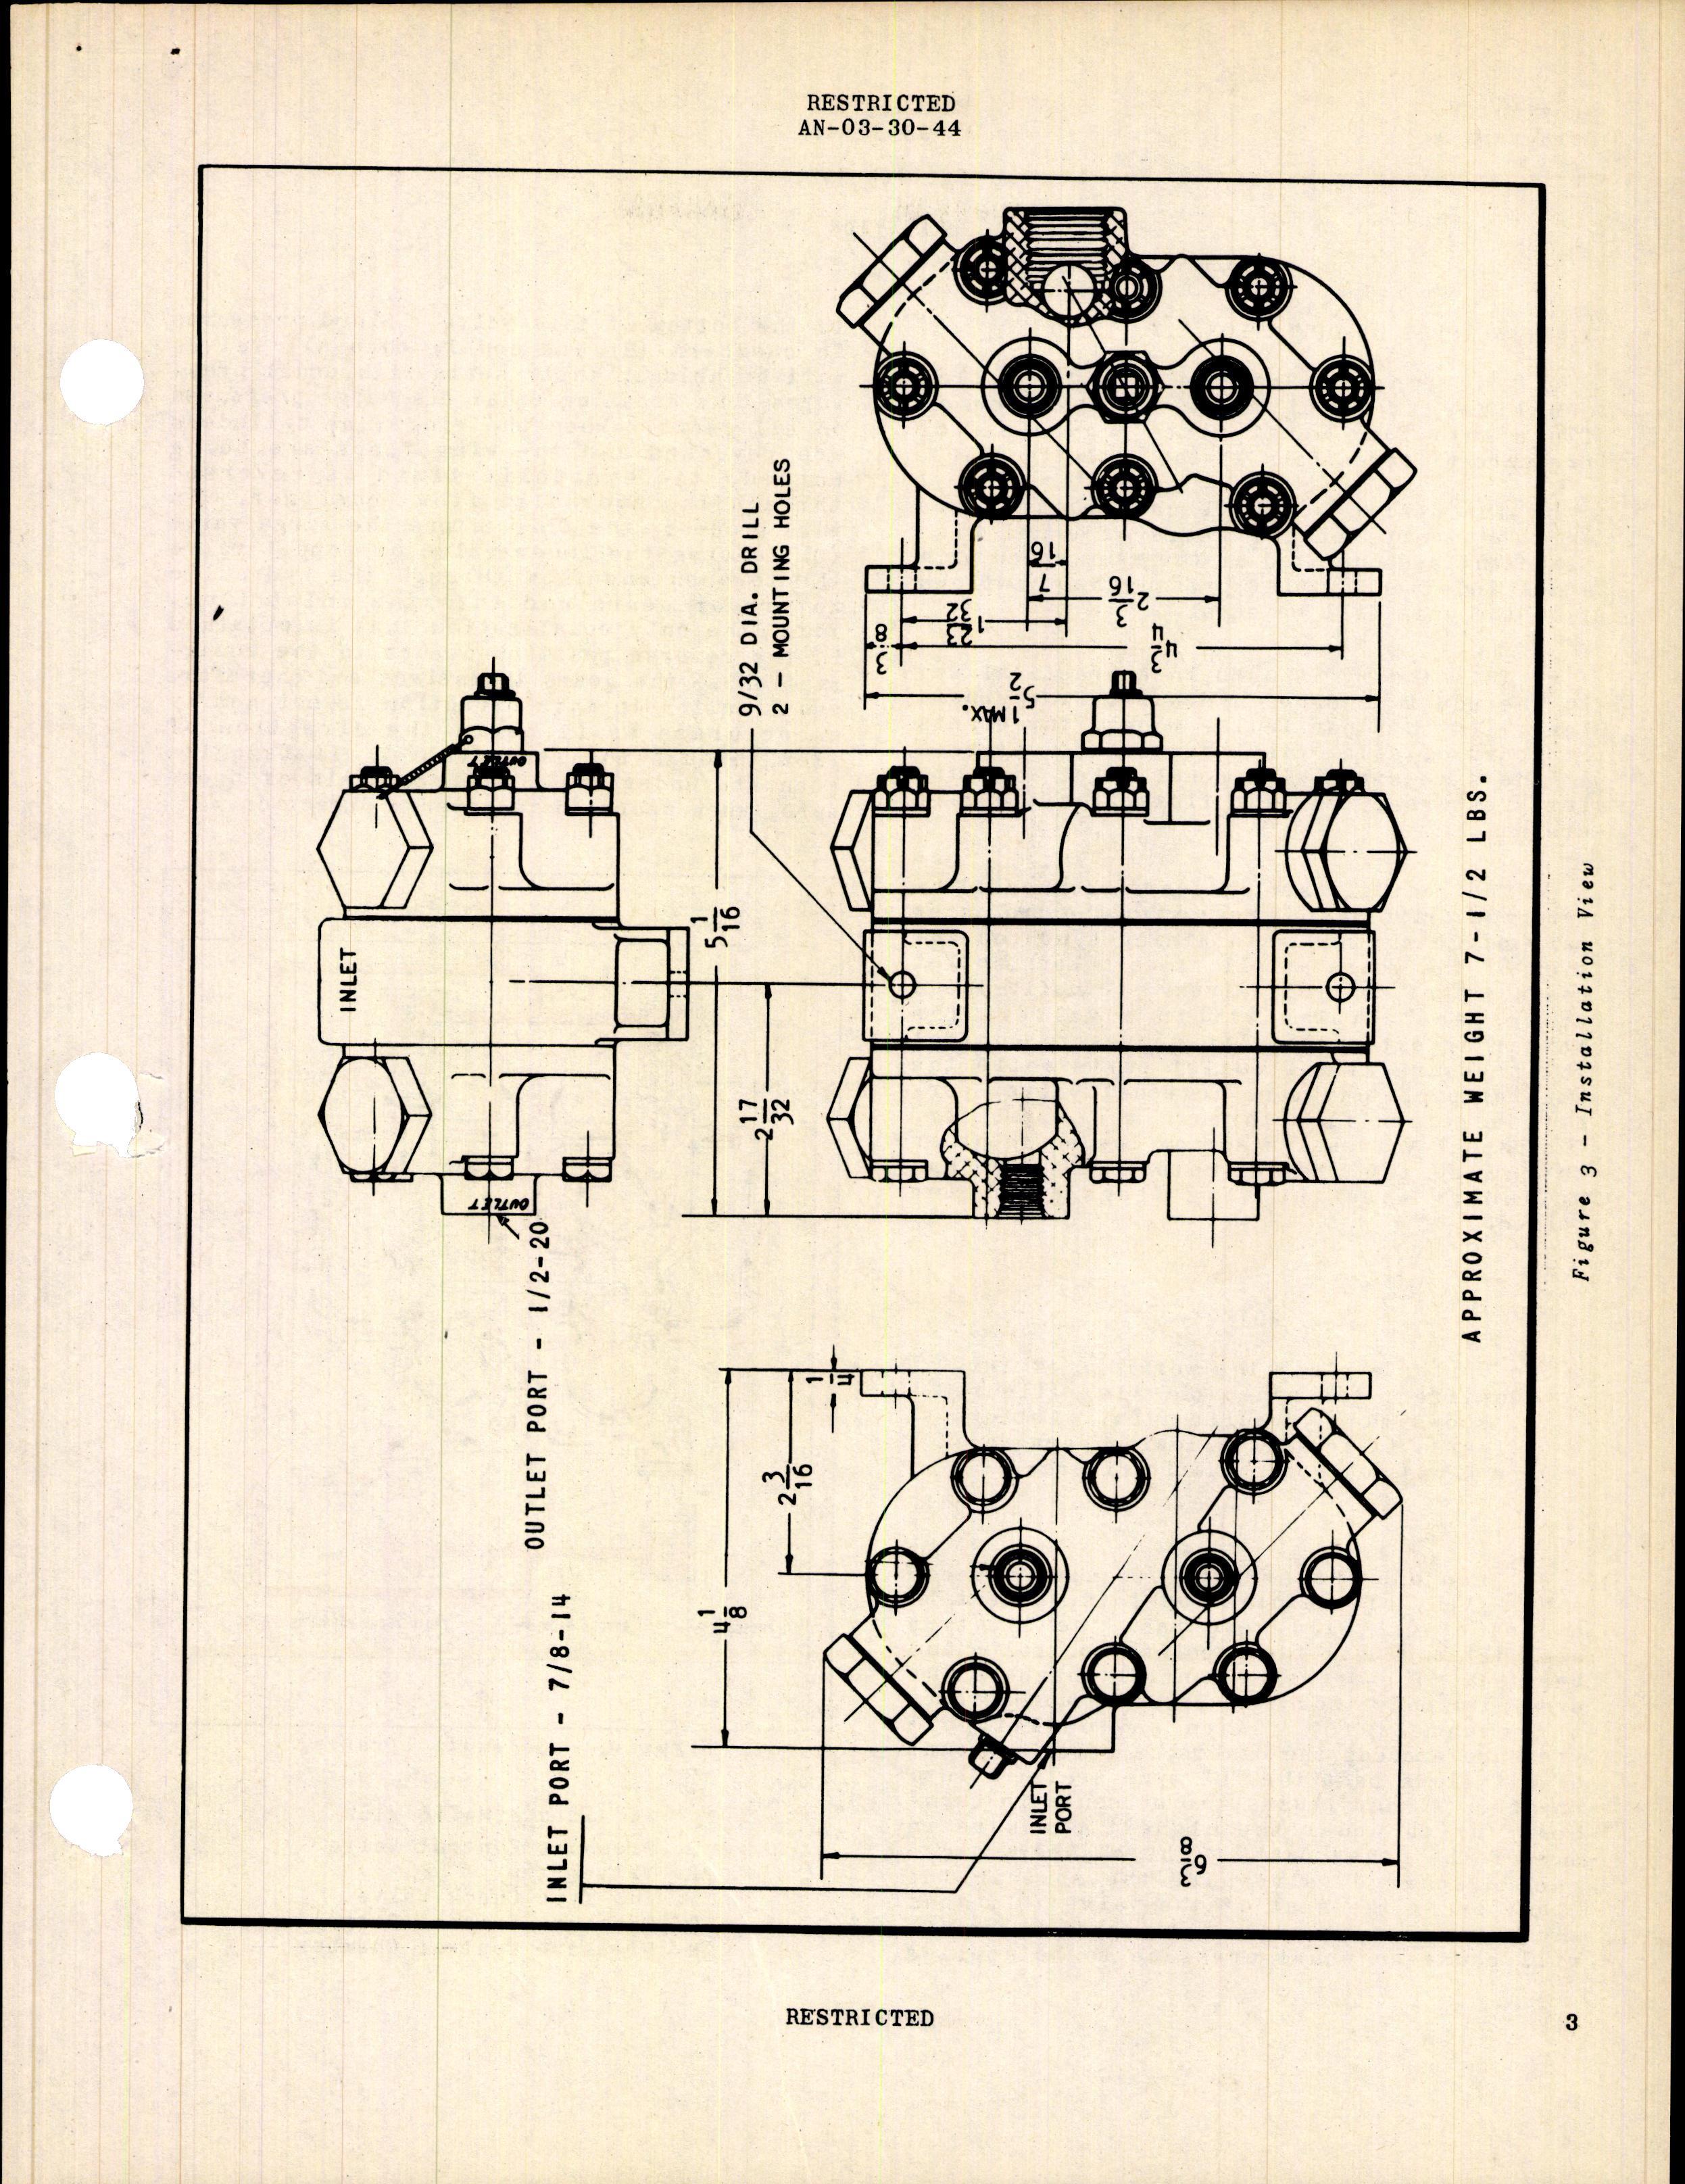 Sample page 7 from AirCorps Library document: Handbook of Instructions with Parts Catalog for Hydraulic Flow Equalizer